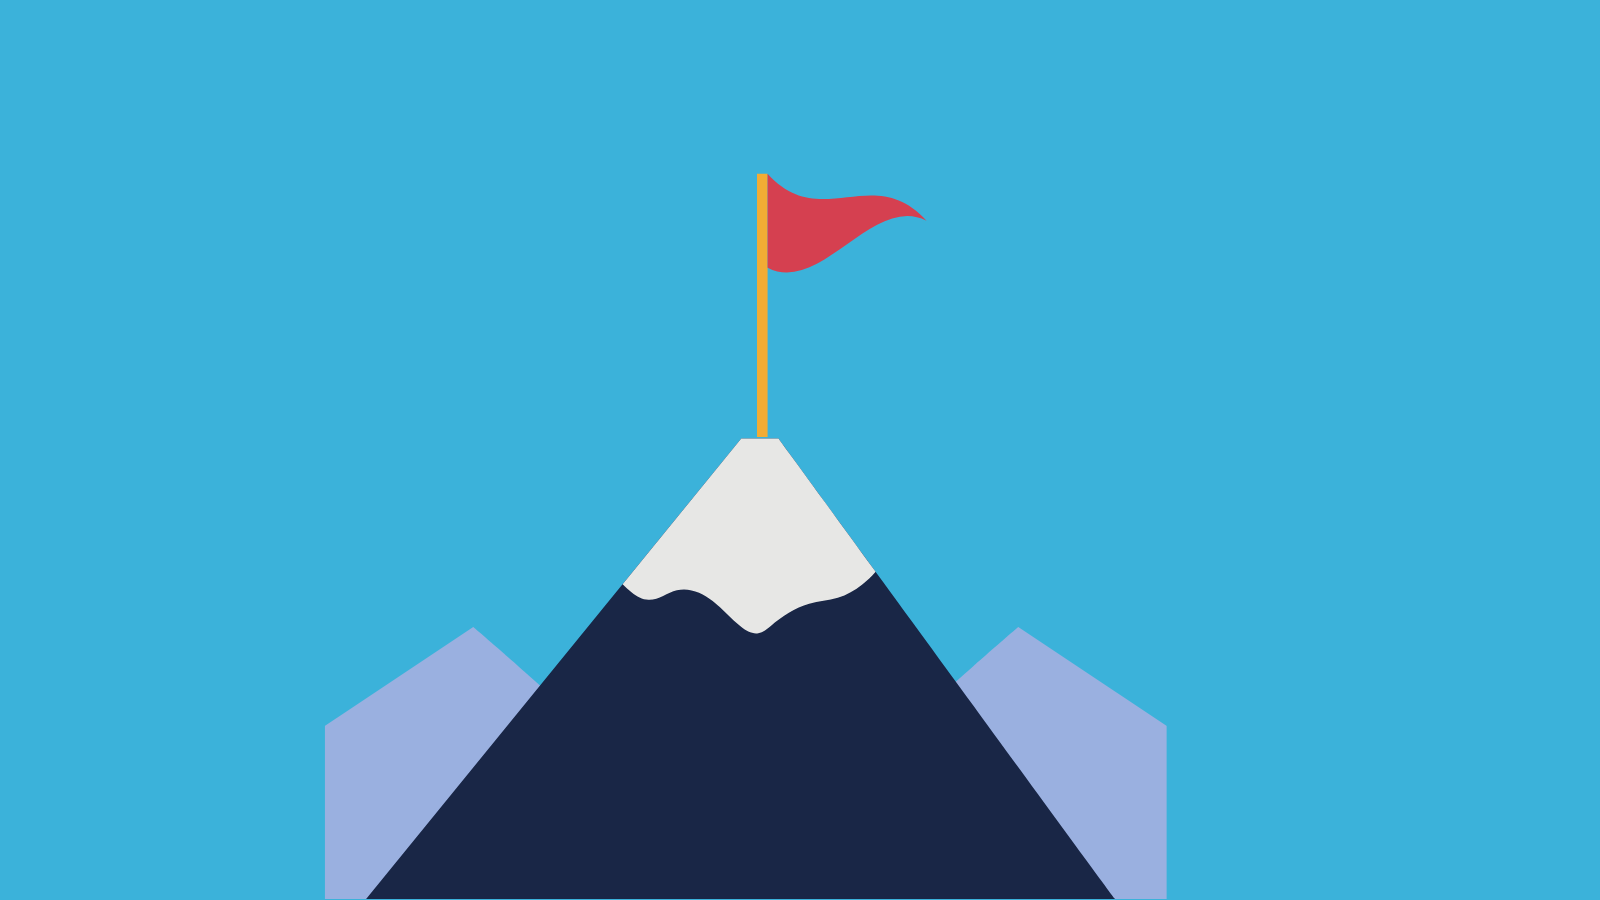 A red flag at the summit of a mountain